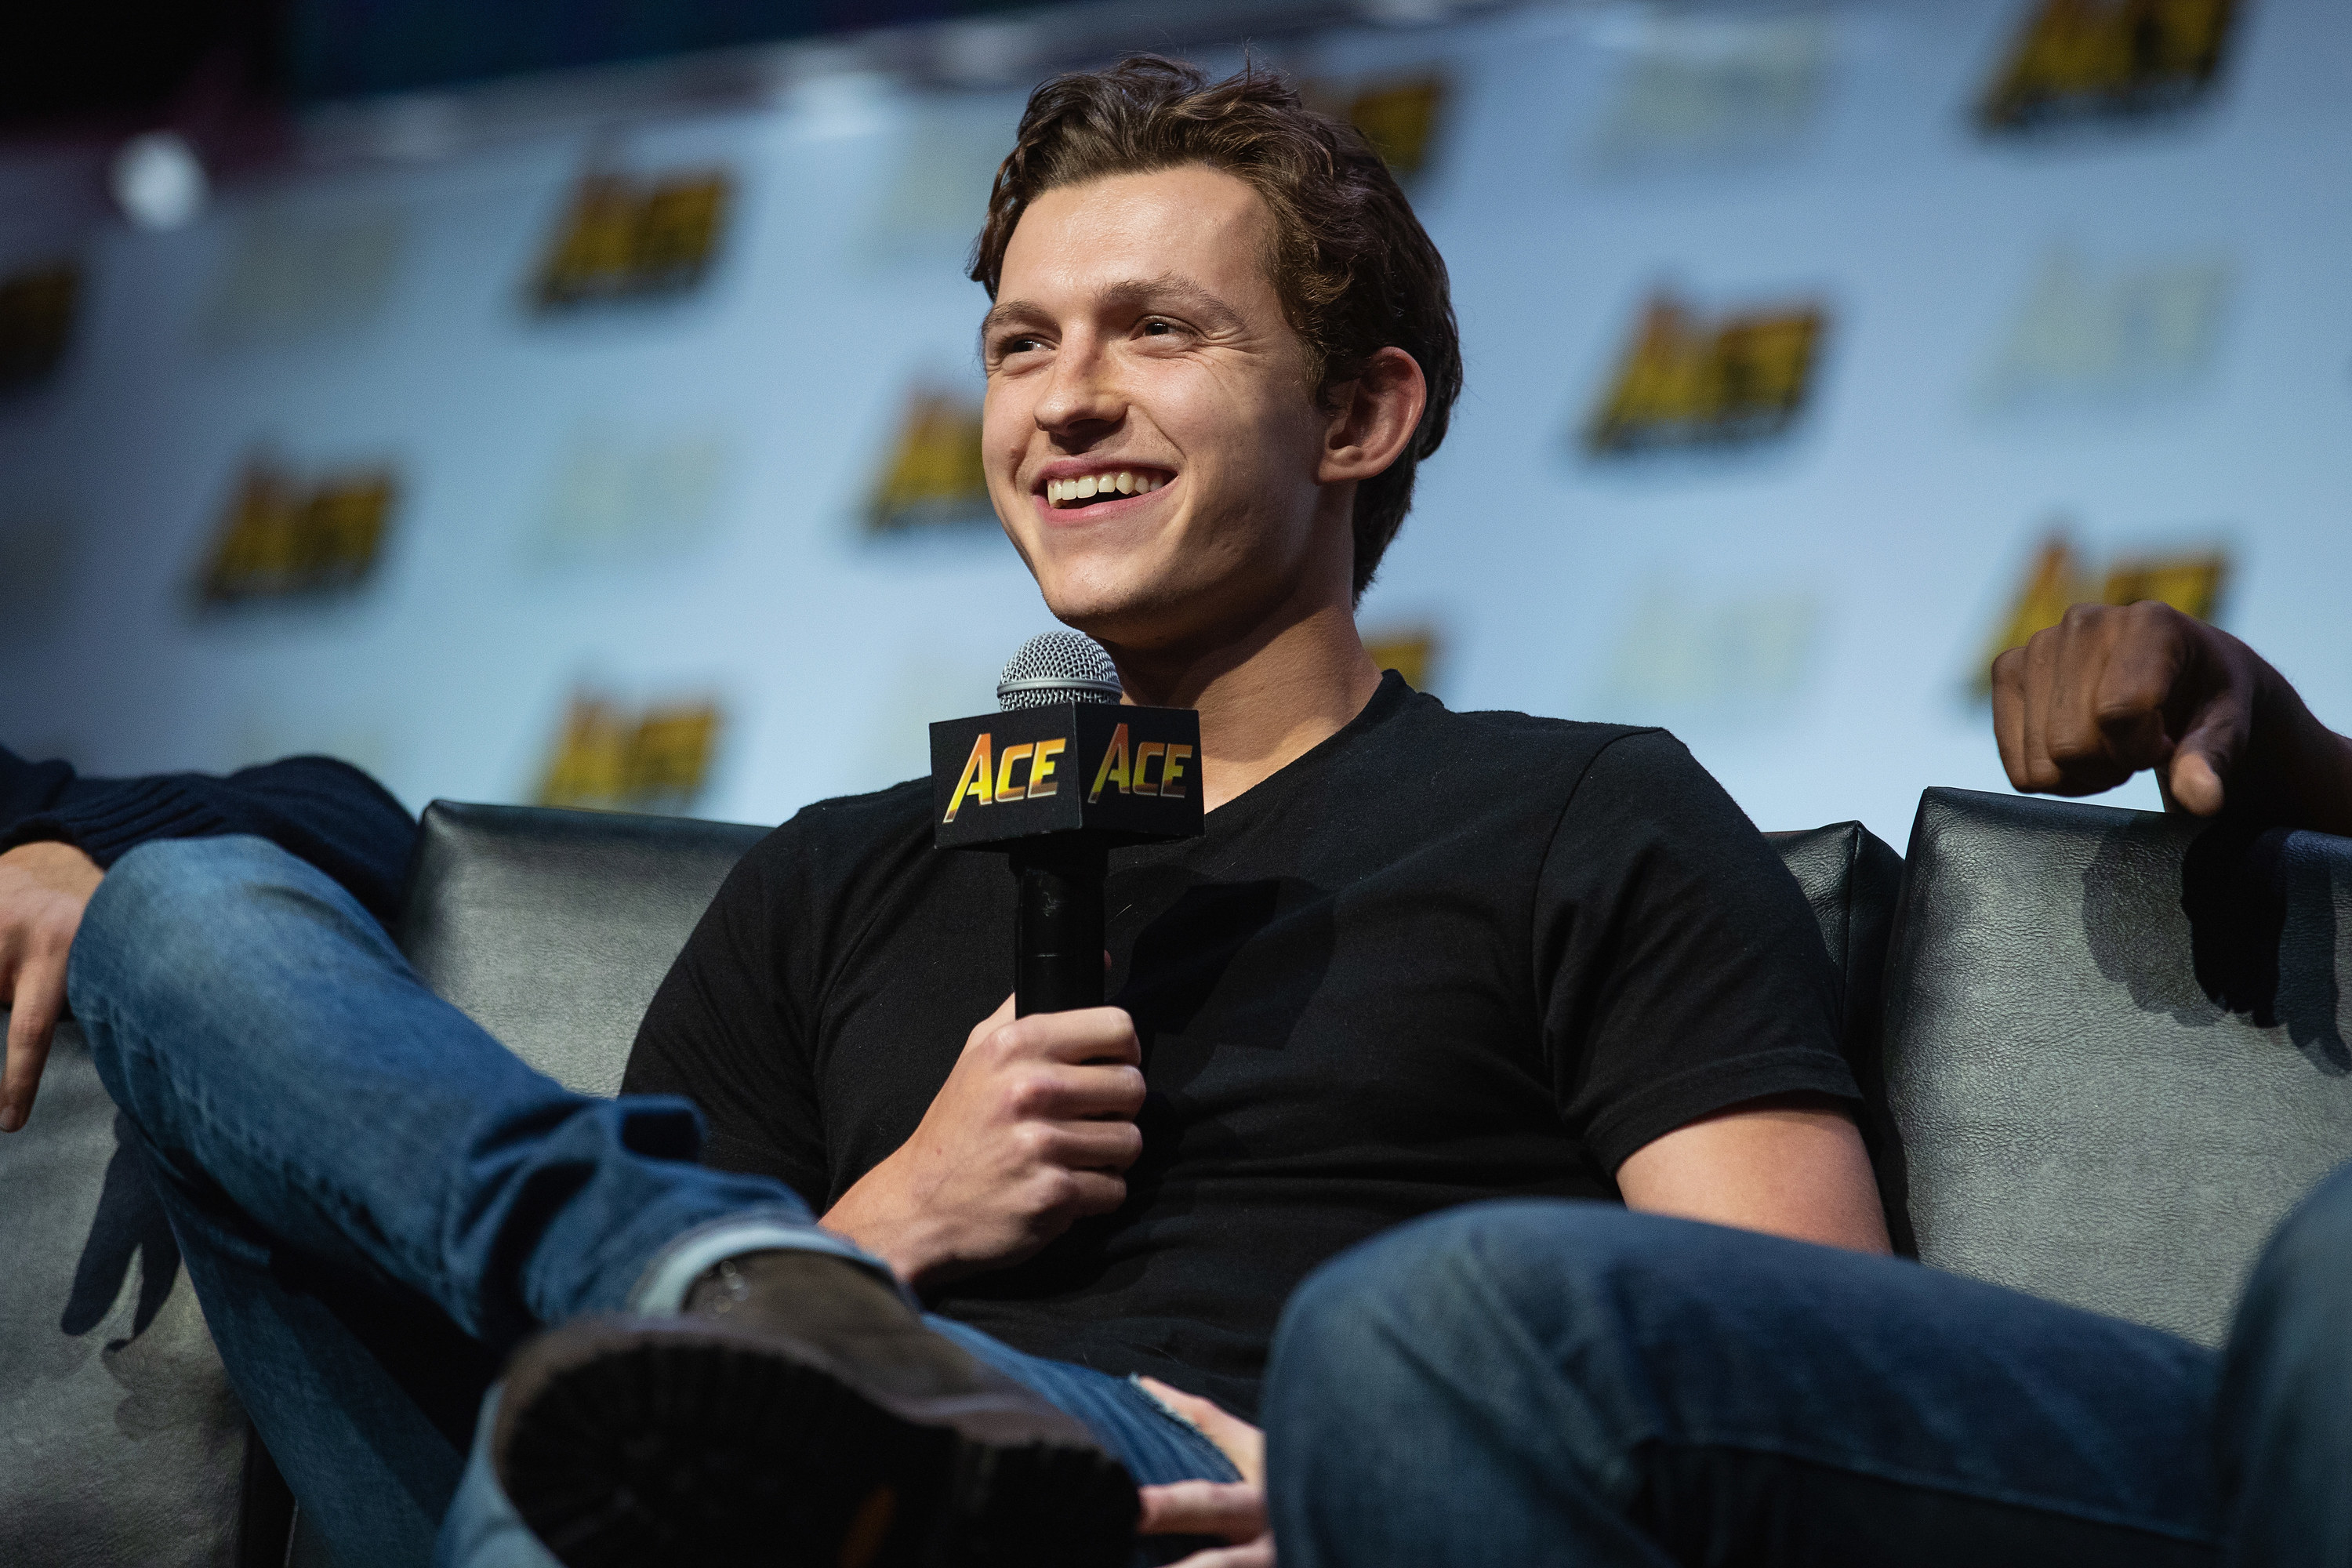 Tom smiling and sitting holding a microphone